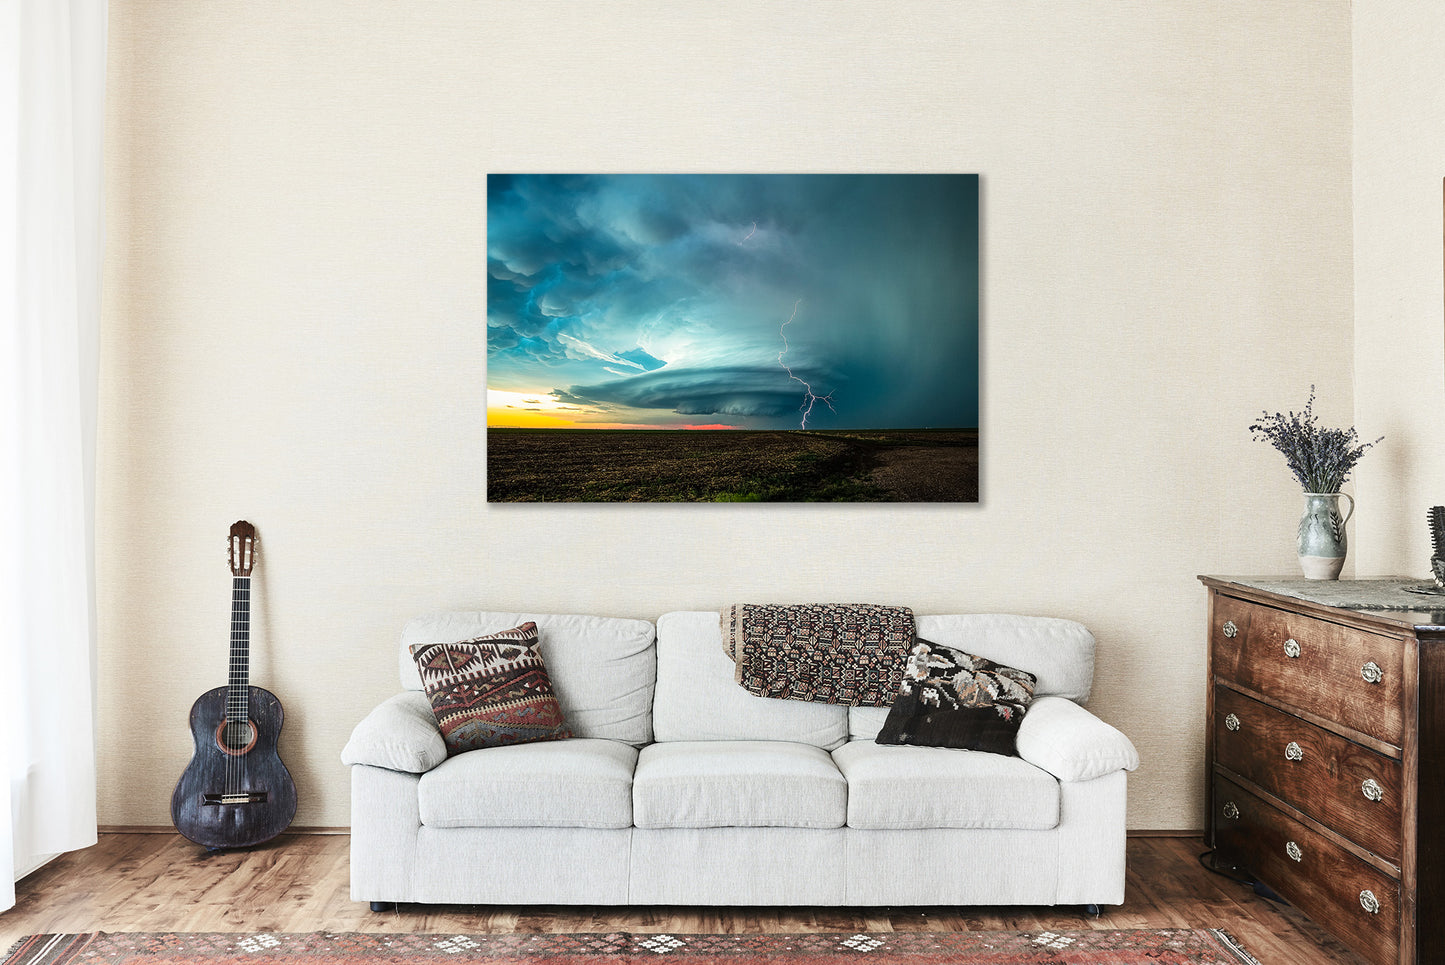 Storm Canvas Wall Art (Ready to Hang) Gallery Wrap of Supercell Thunderstorm with Lightning Bolt at Sunset on Stormy Spring Evening in Kansas Weather Photography Nature Decor